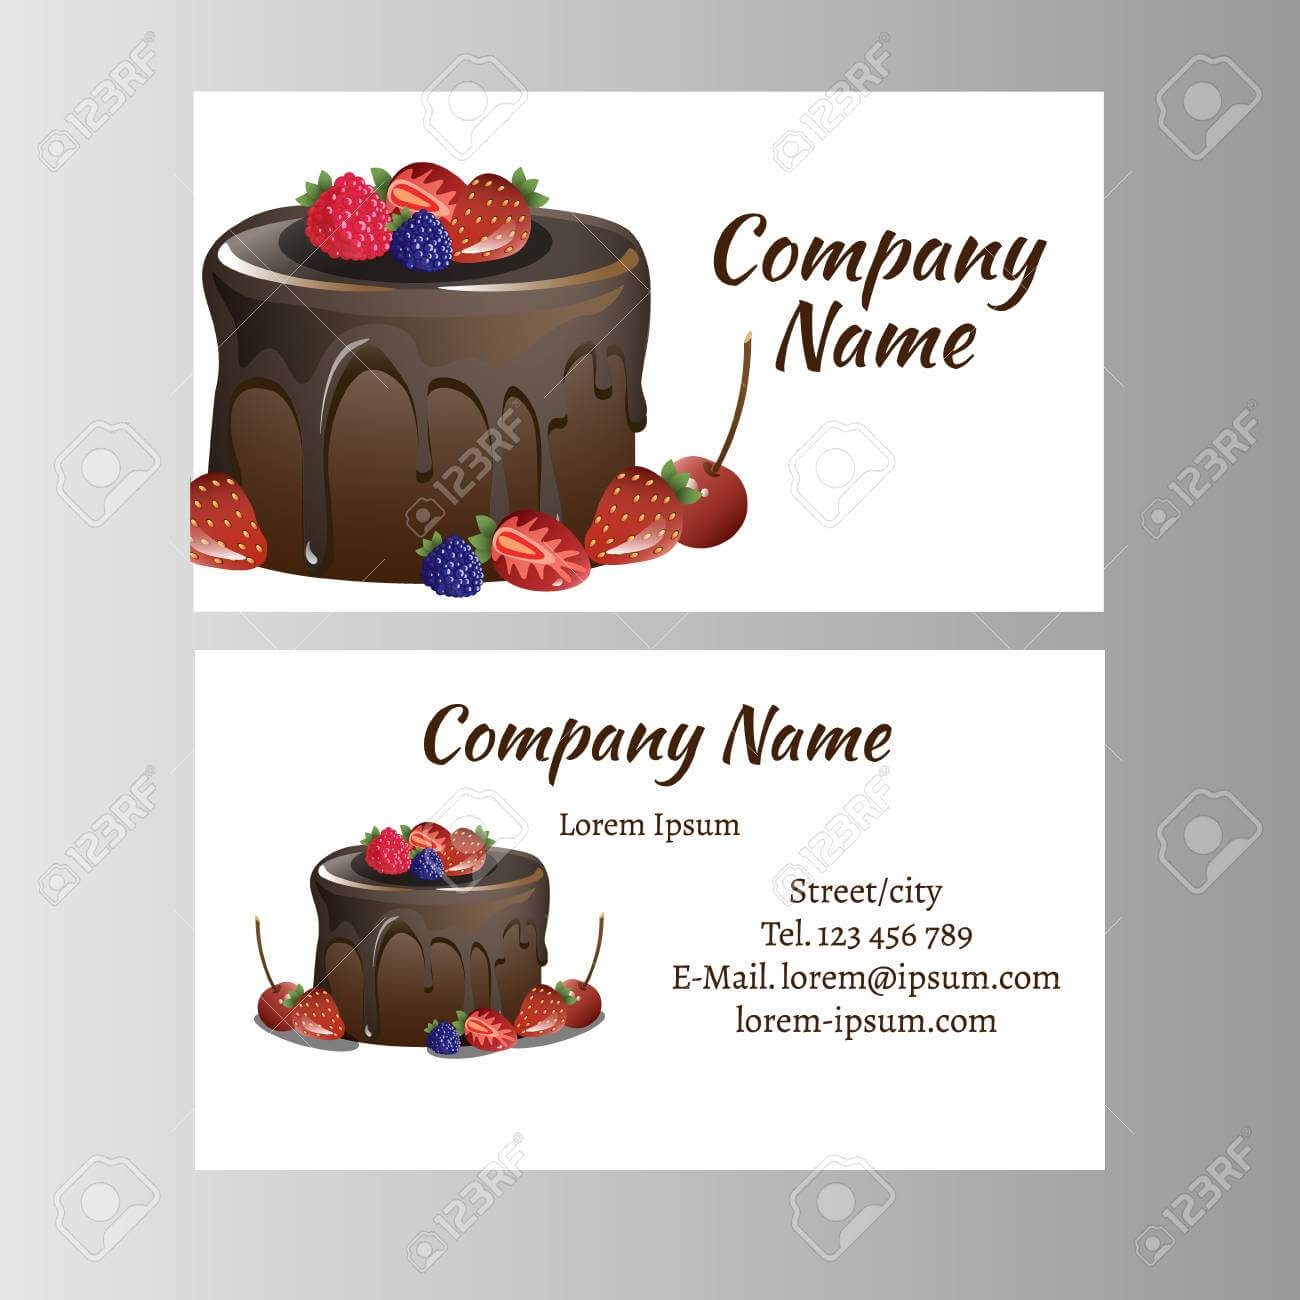 Business Card Template For Bakery Business. Intended For Cake Business Cards Templates Free